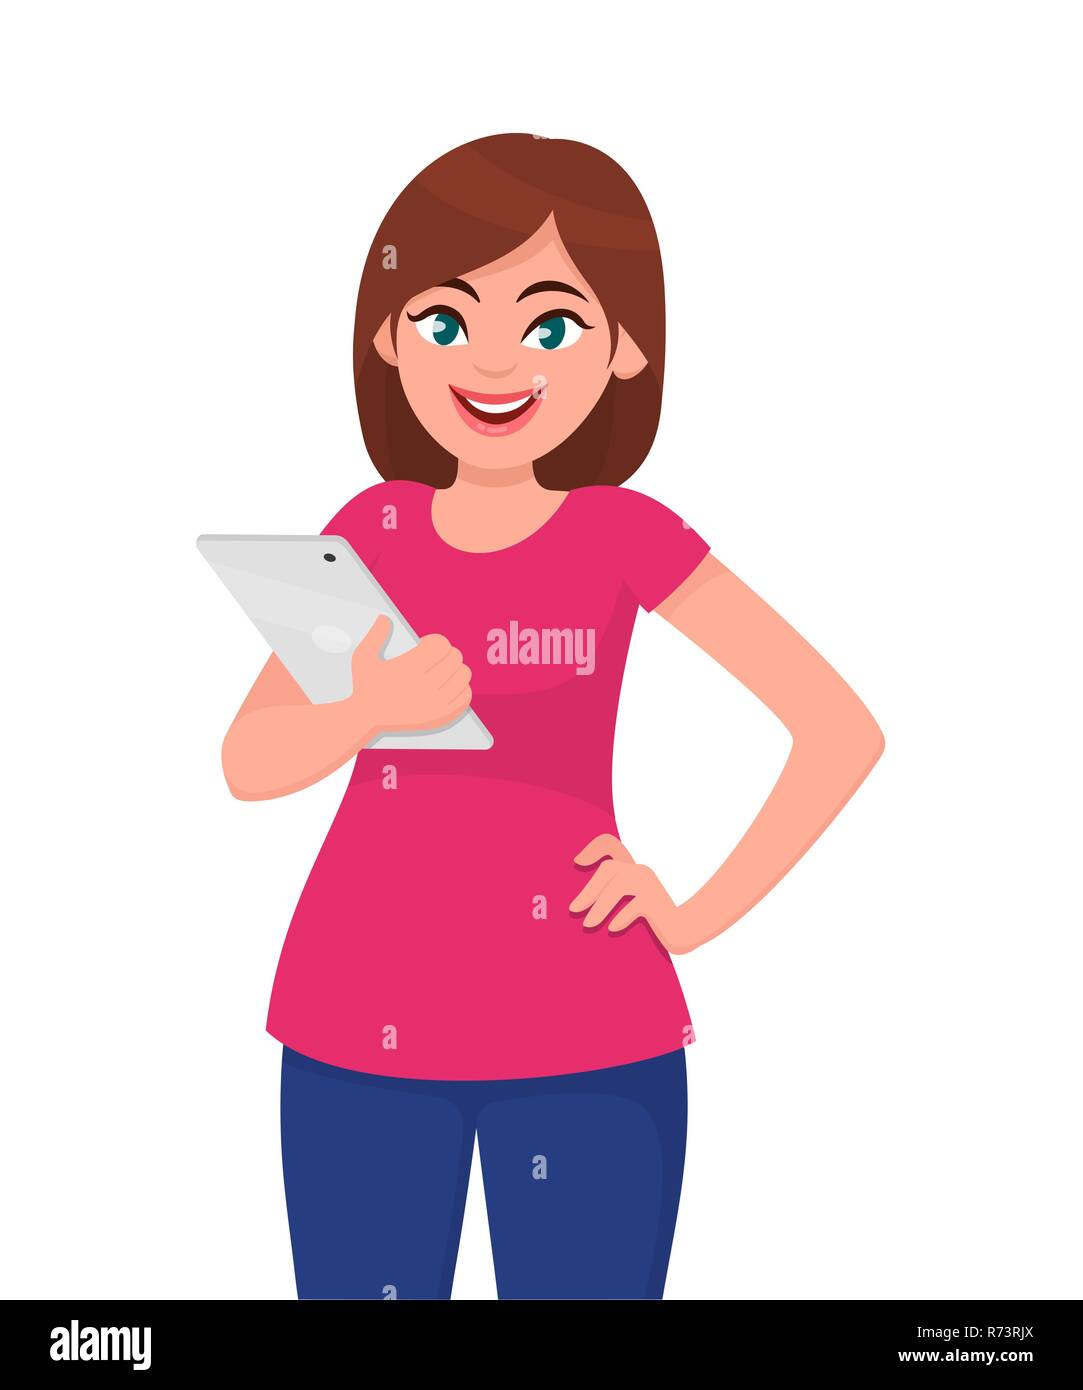 Young woman showing/holding blank tab or tablet computer. Modern technology lifestyle concept illustration in vector cartoon style. Stock Vector